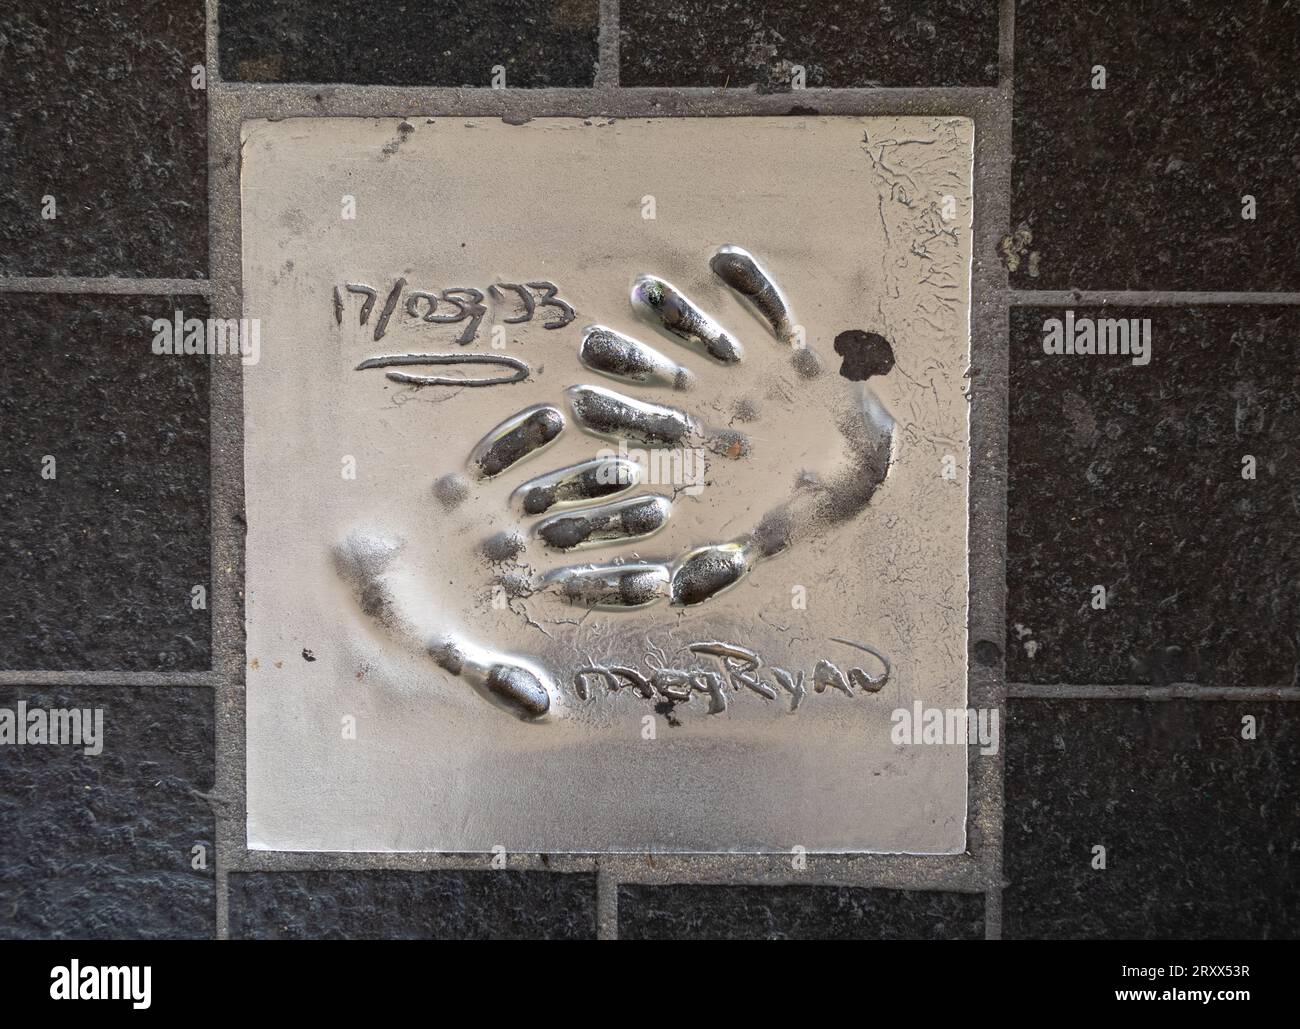 The handprint from famous American actress and film producer Meg Ryan set into the pavement of The Allée des Étoiles (Avenue of the Stars) in Cannes, Stock Photo